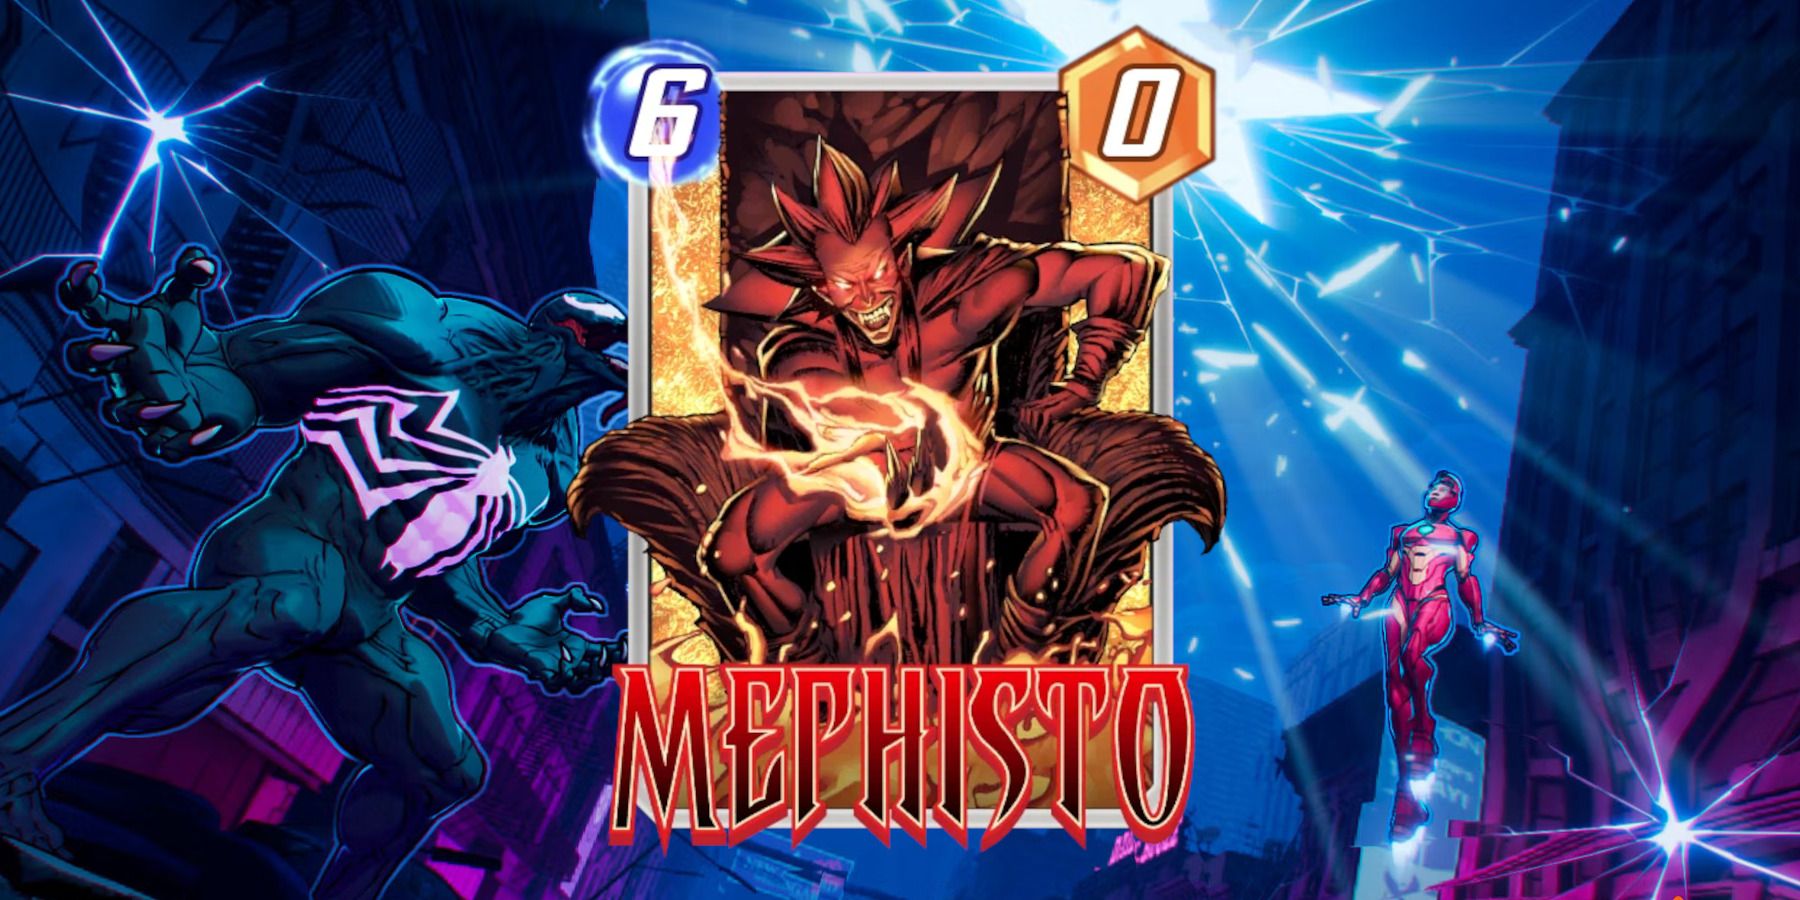 The Mephisto card in Marvel Snap on top of promotional art for the game